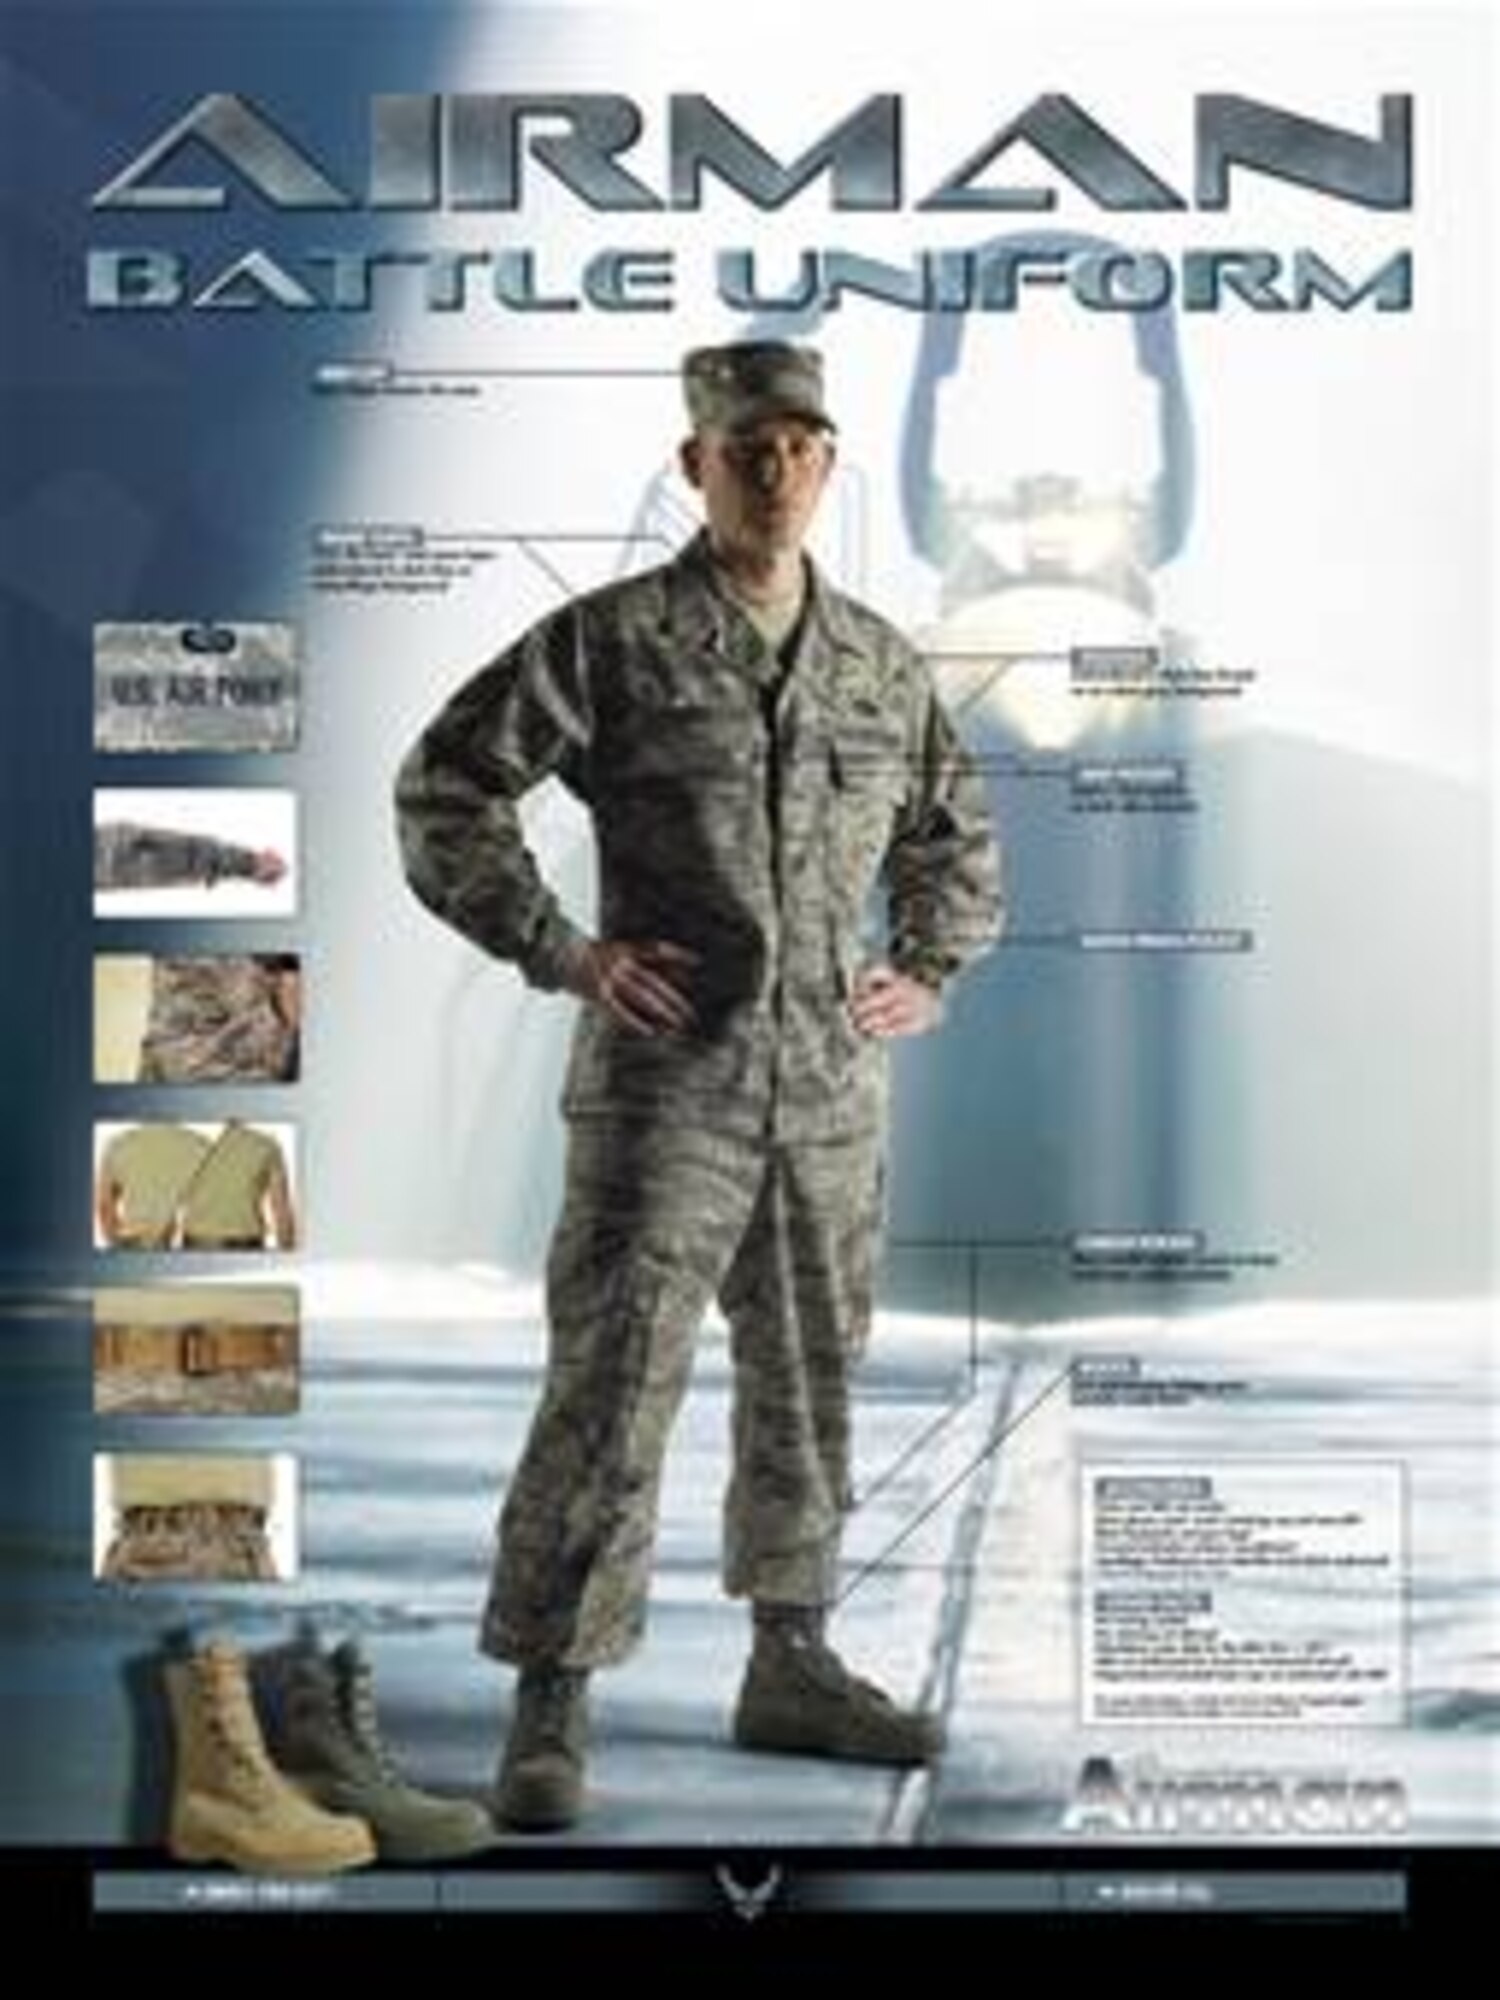 Airman Battle Uniform.  Poster created by Patrick Harris of the Air Force News Agency.  This poster was included in the Spring 2007 issue of Airman magazine.  This image is 7.5x10 inches @ 300 ppi and is available up to 18x24 @ 300 ppi.  Air Force Link does not provide printed posters but a PDF file of the poster can be provided so that you can get the poster printed through your servicing DAPS or through commercial sources.  Requests for the file can be made to afgraphics@dma.mil. Please specify the title and number.